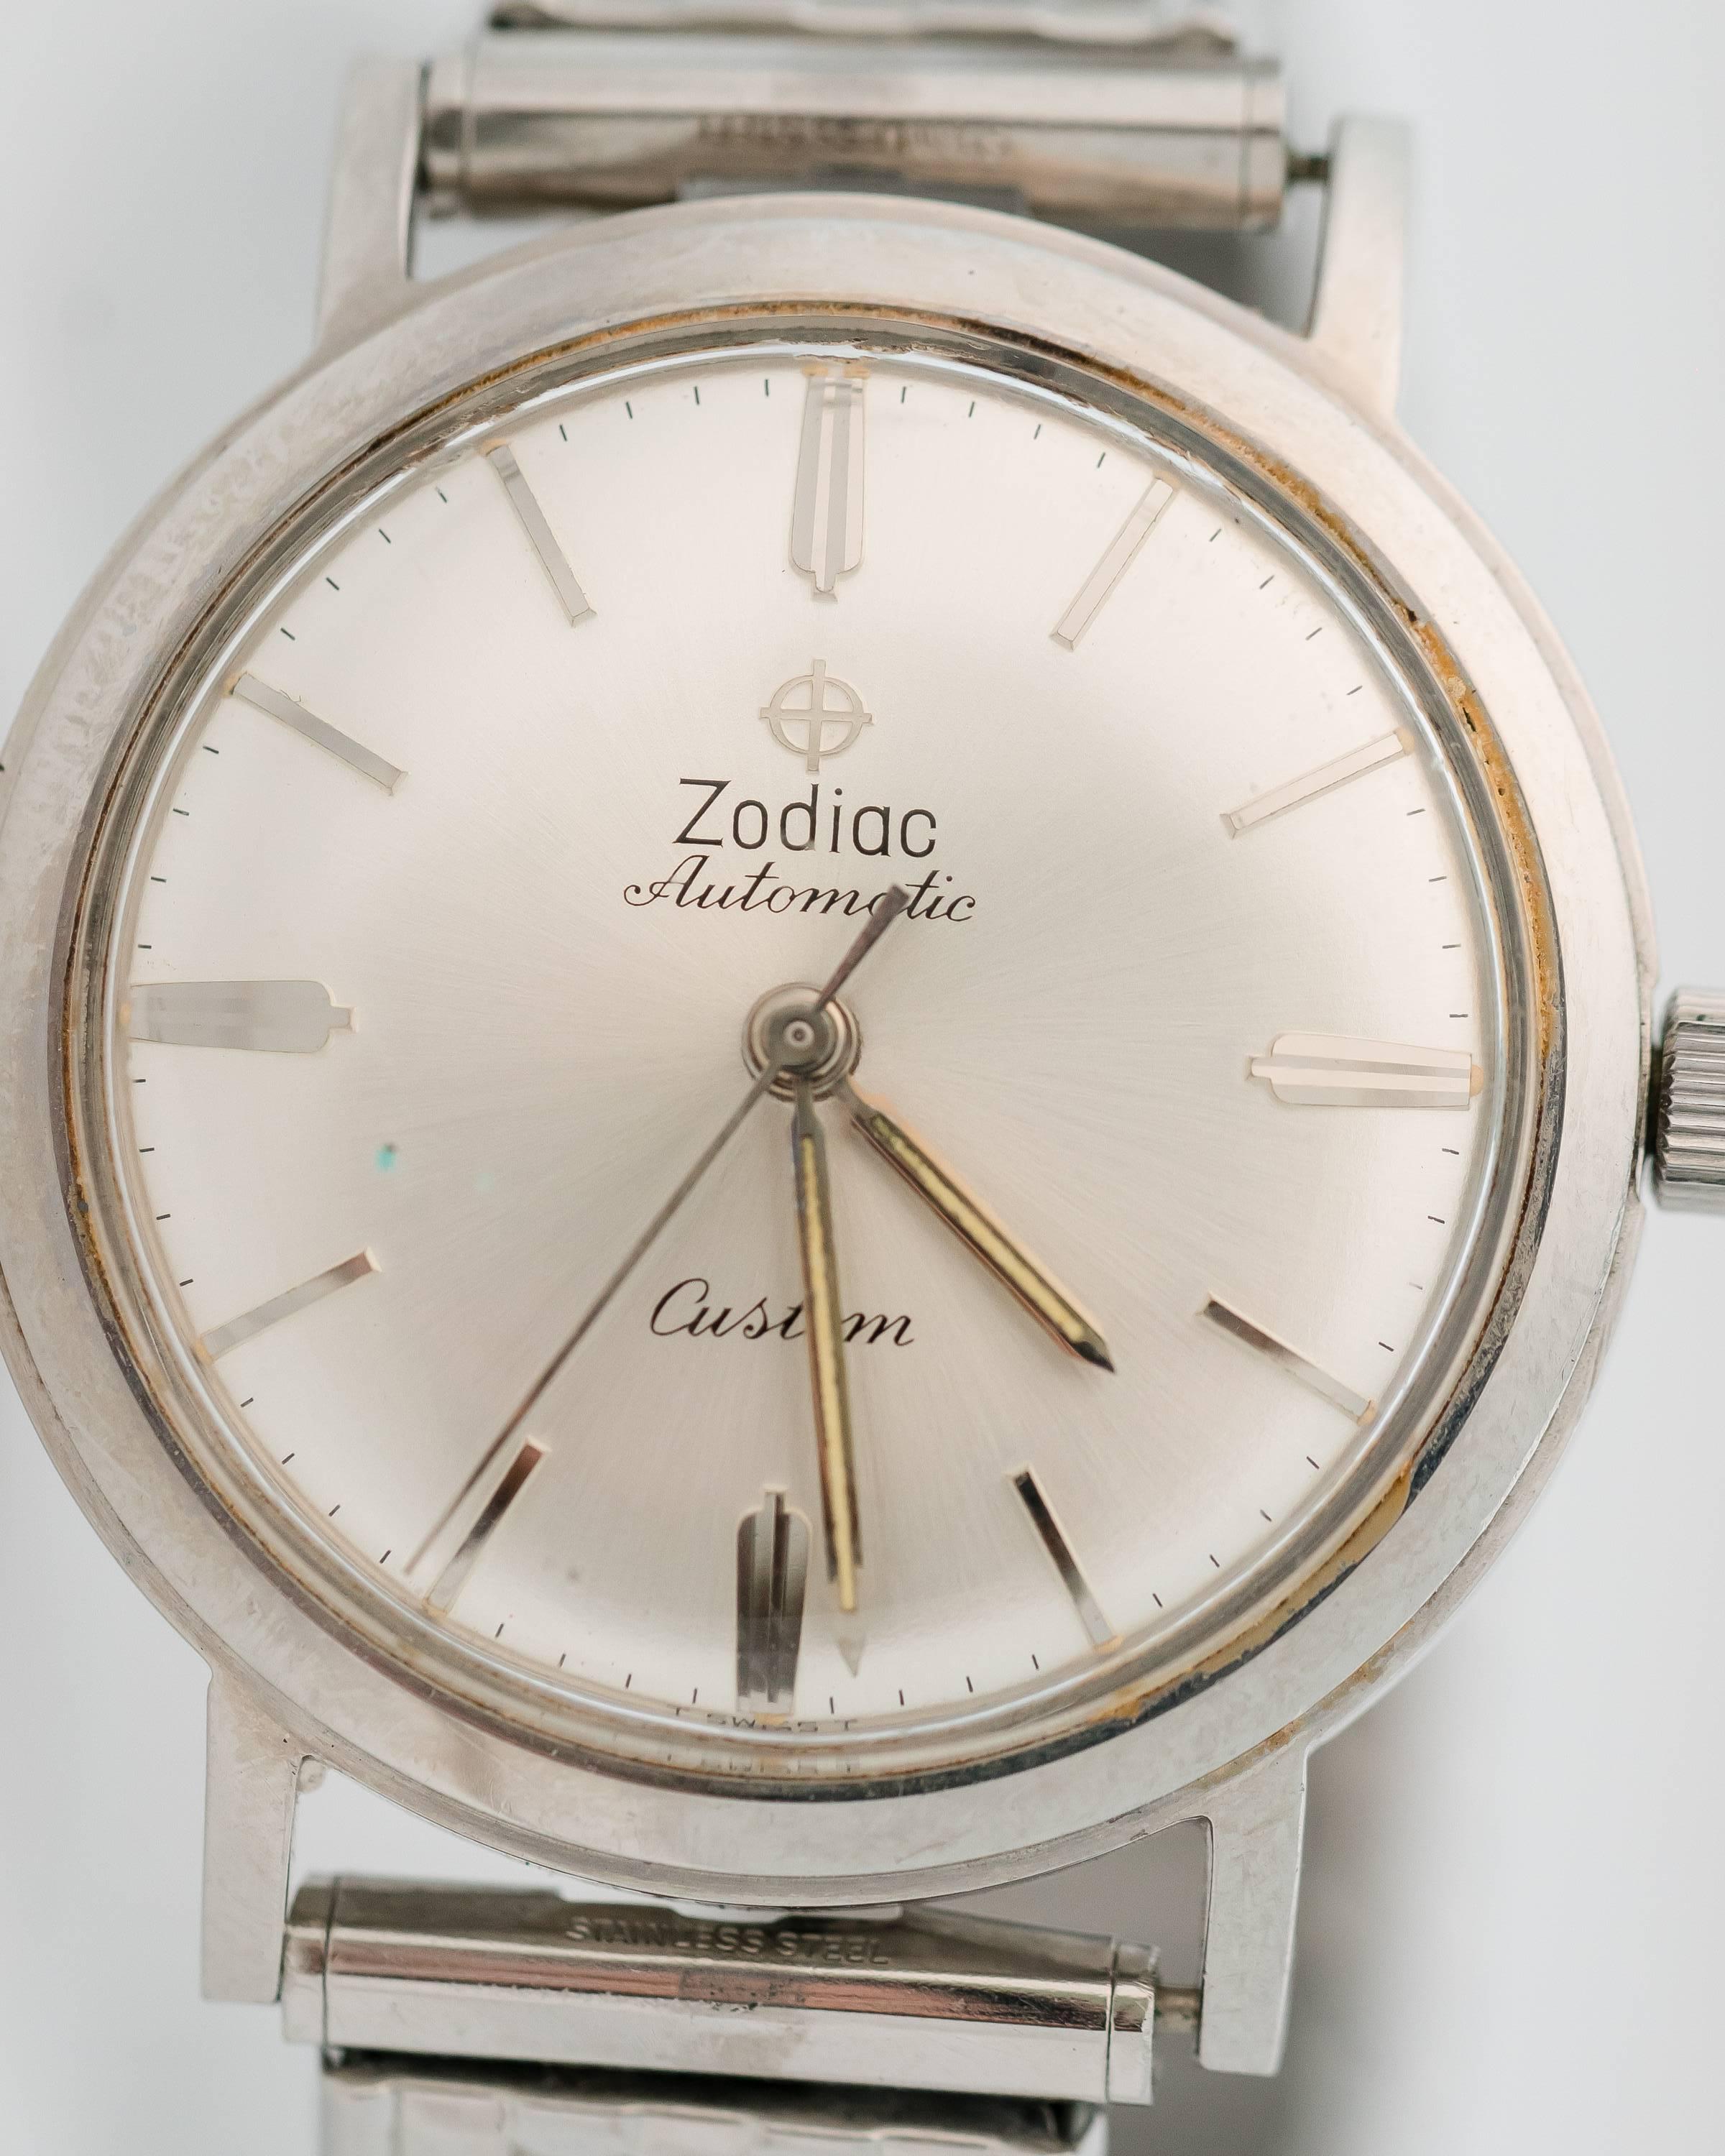 Amazing! Zodiac designed this 1950s Retro Stainless Steel Swiss Automatic watch with antimagnetic as well as water- and shock-resistant technologies. Meticulous attention to design detail resulted in a classic watch with optimal performance